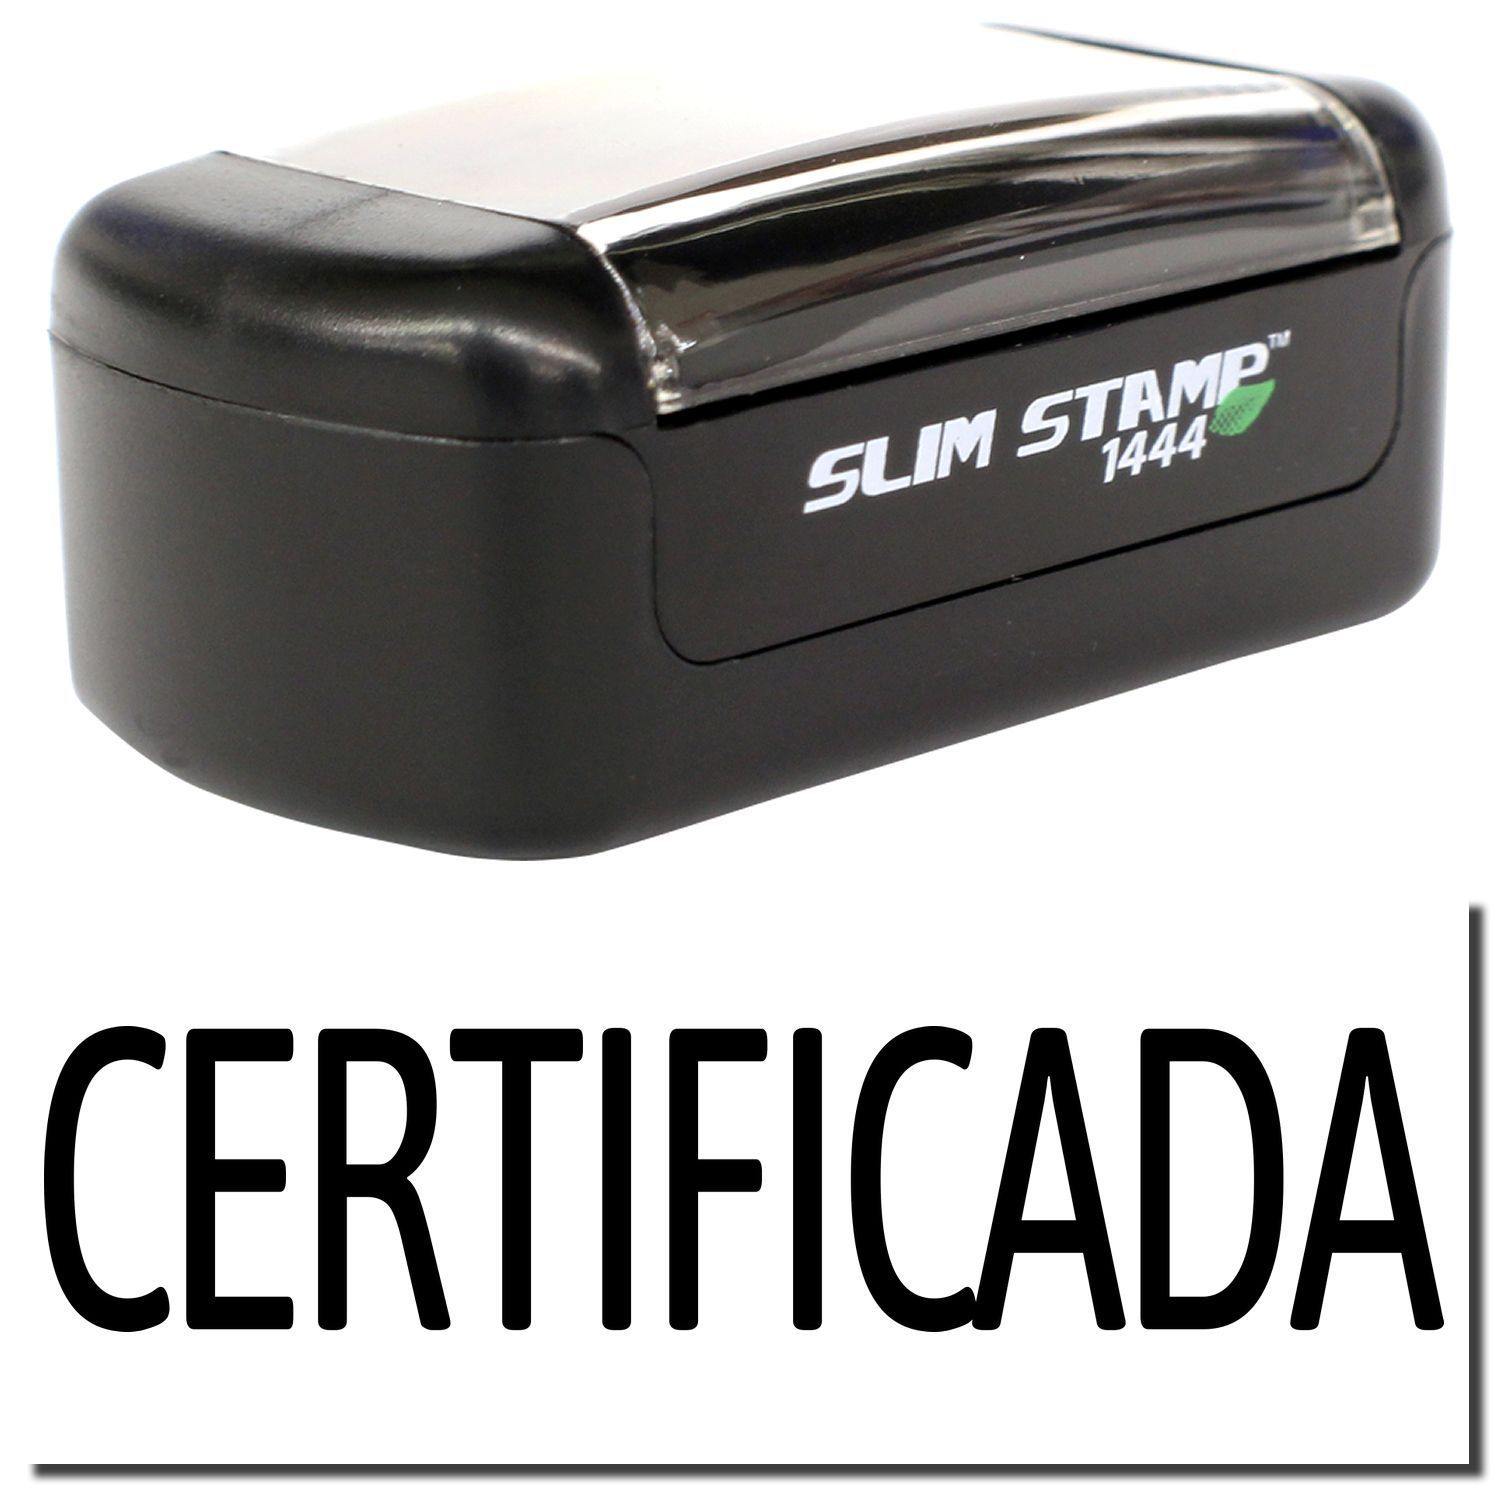 A stock office pre-inked stamp with a stamped image showing how the text "CERTIFICADA" is displayed after stamping.